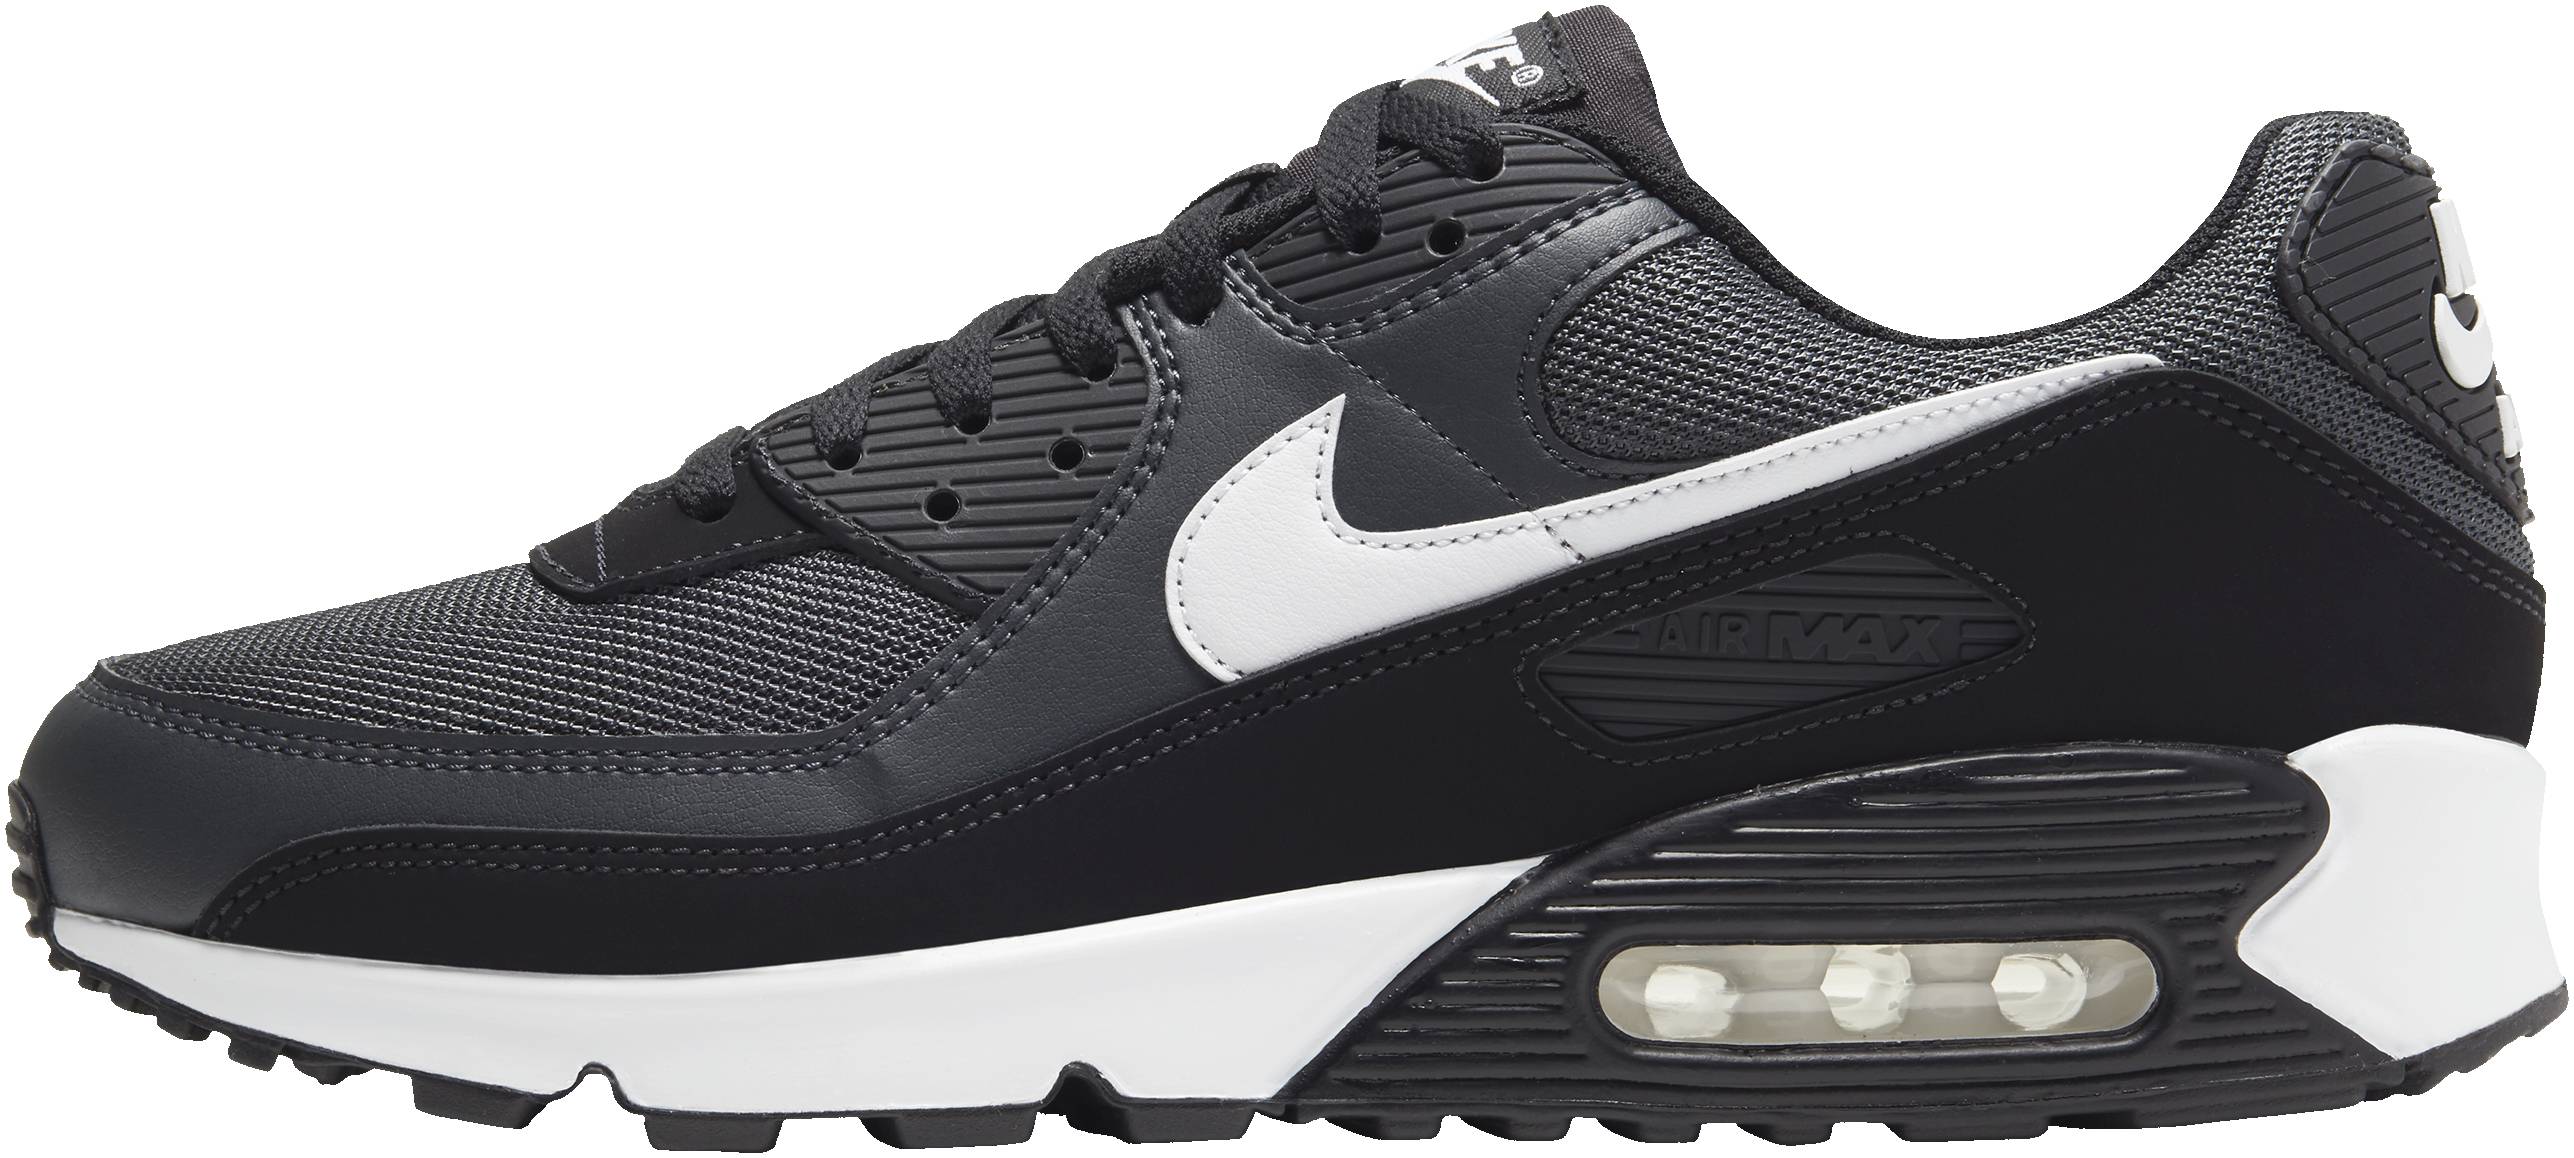 Only $68 + Review of Nike Air Max 90 